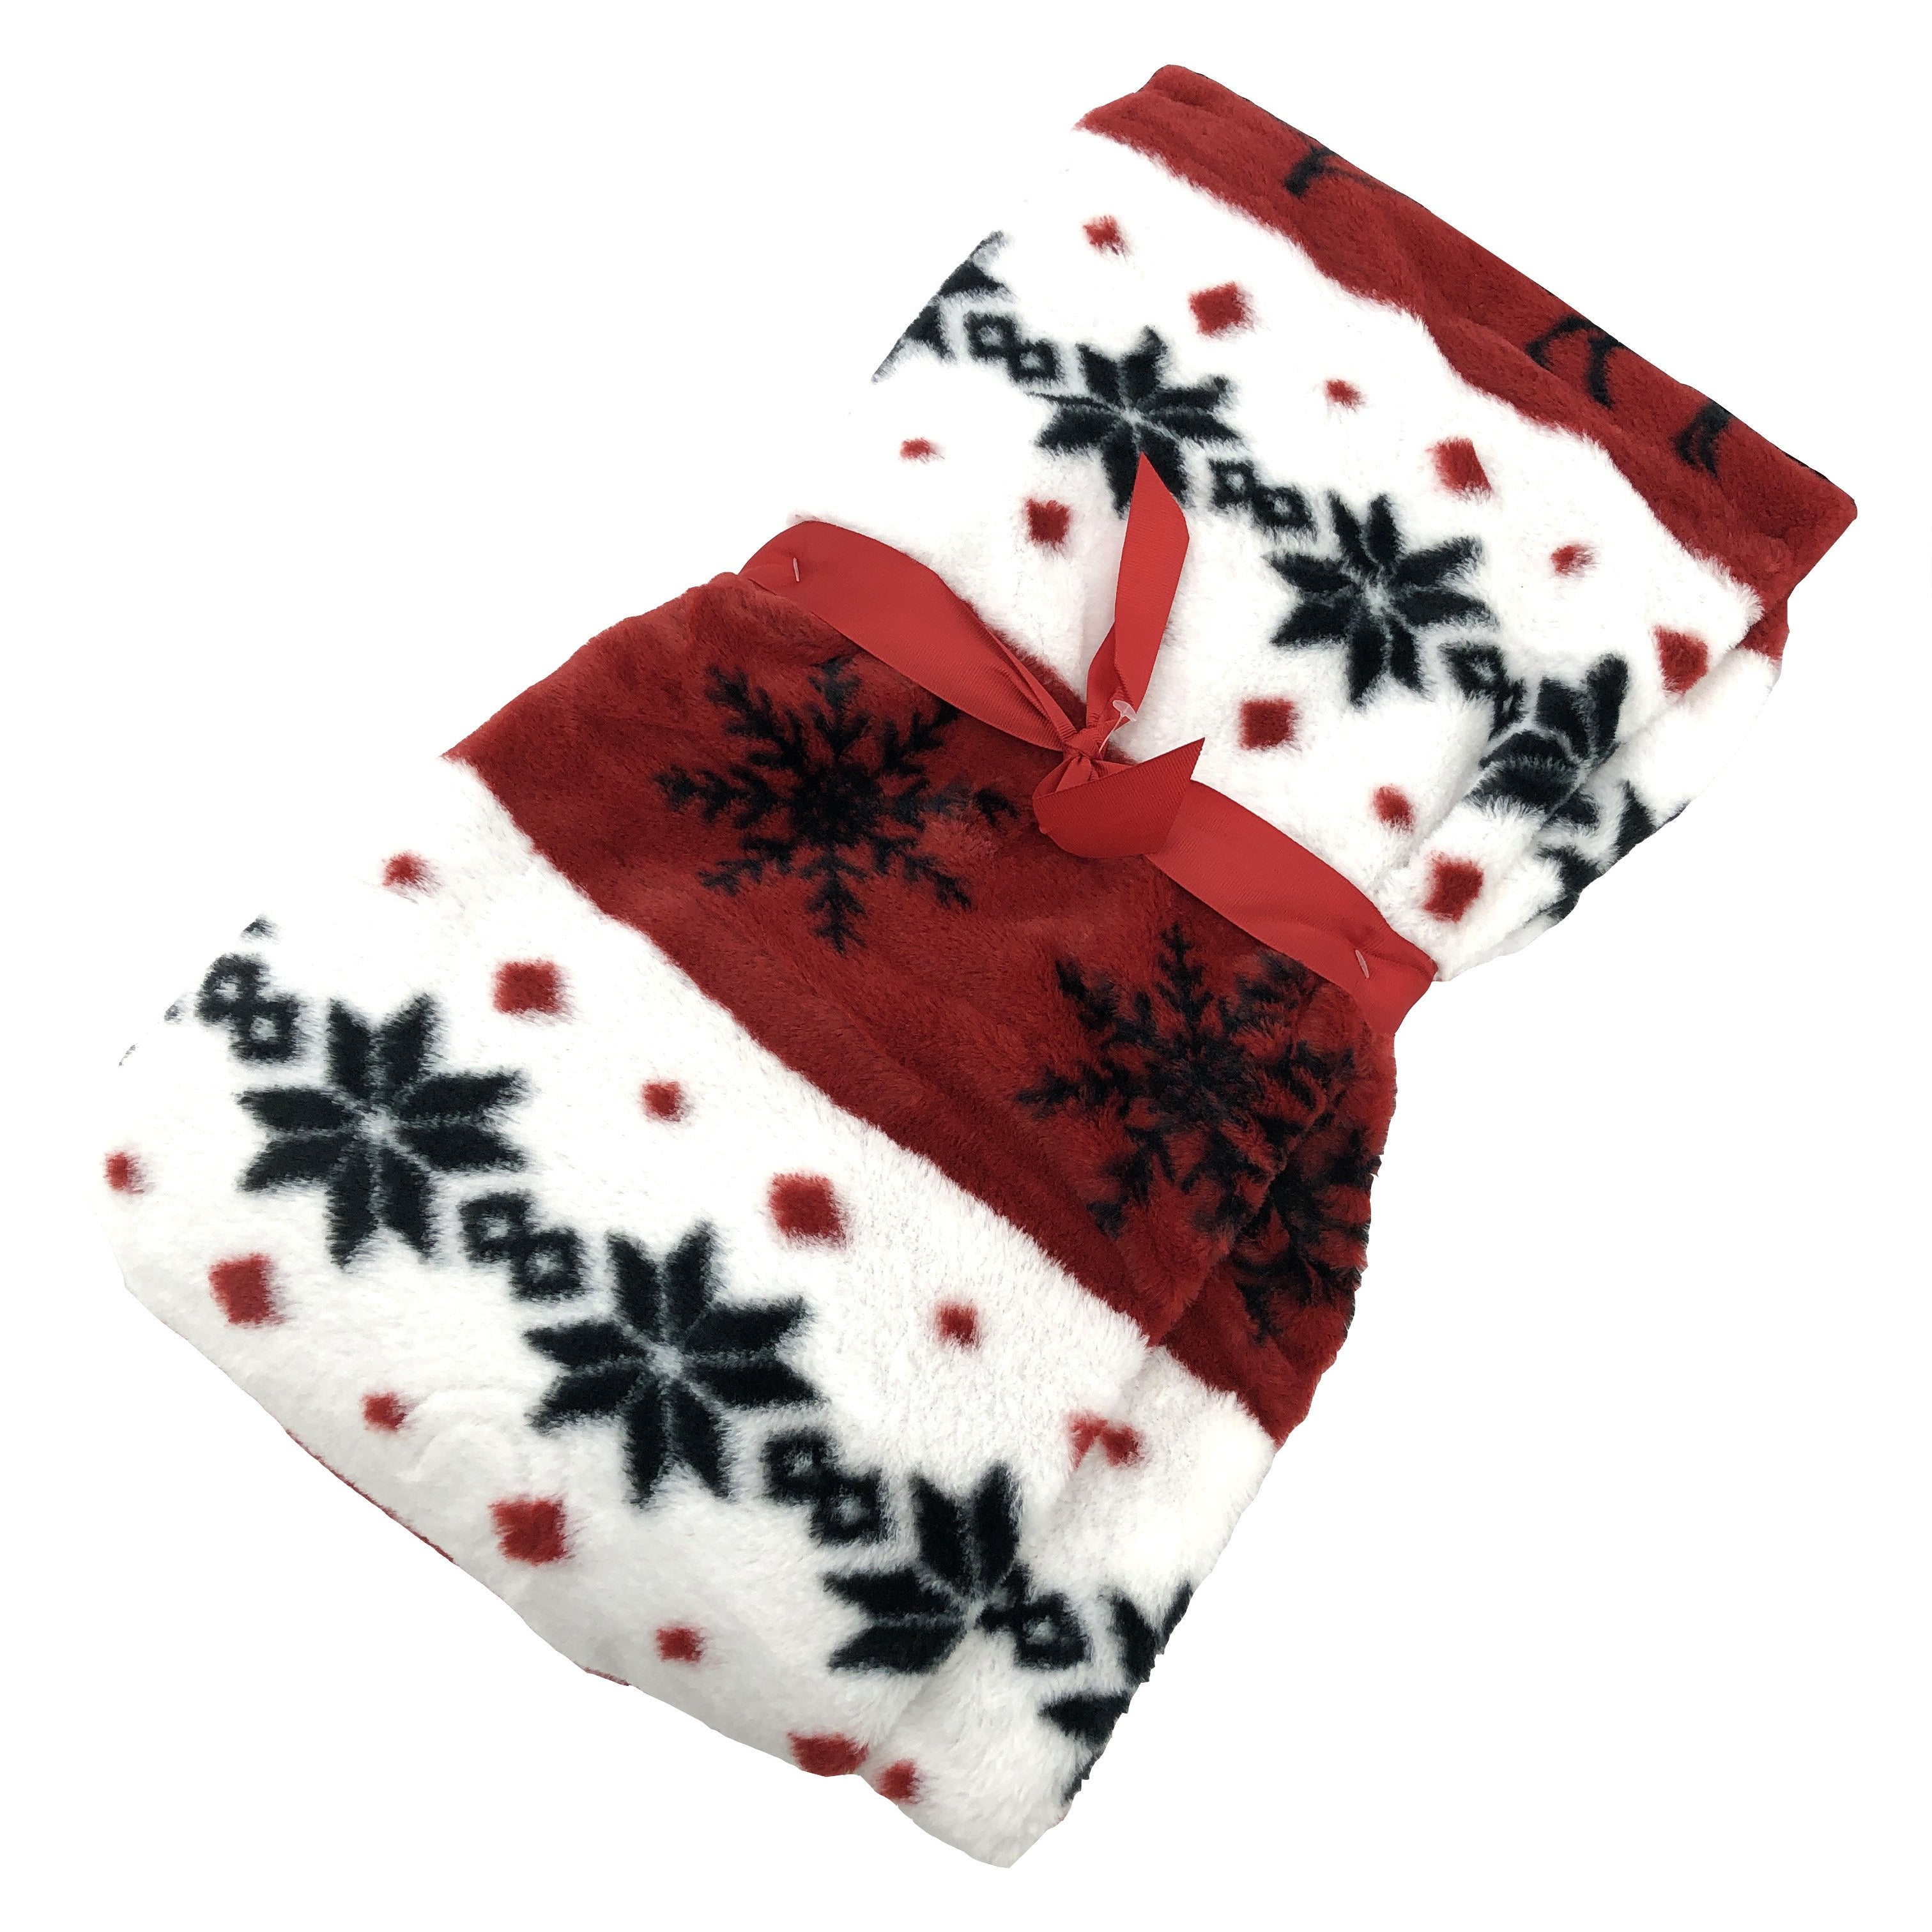 Safdie Super Soft Christmas Throw / Couch / Bedroom / Seasonal Decor / Star and Snowflake Pattern